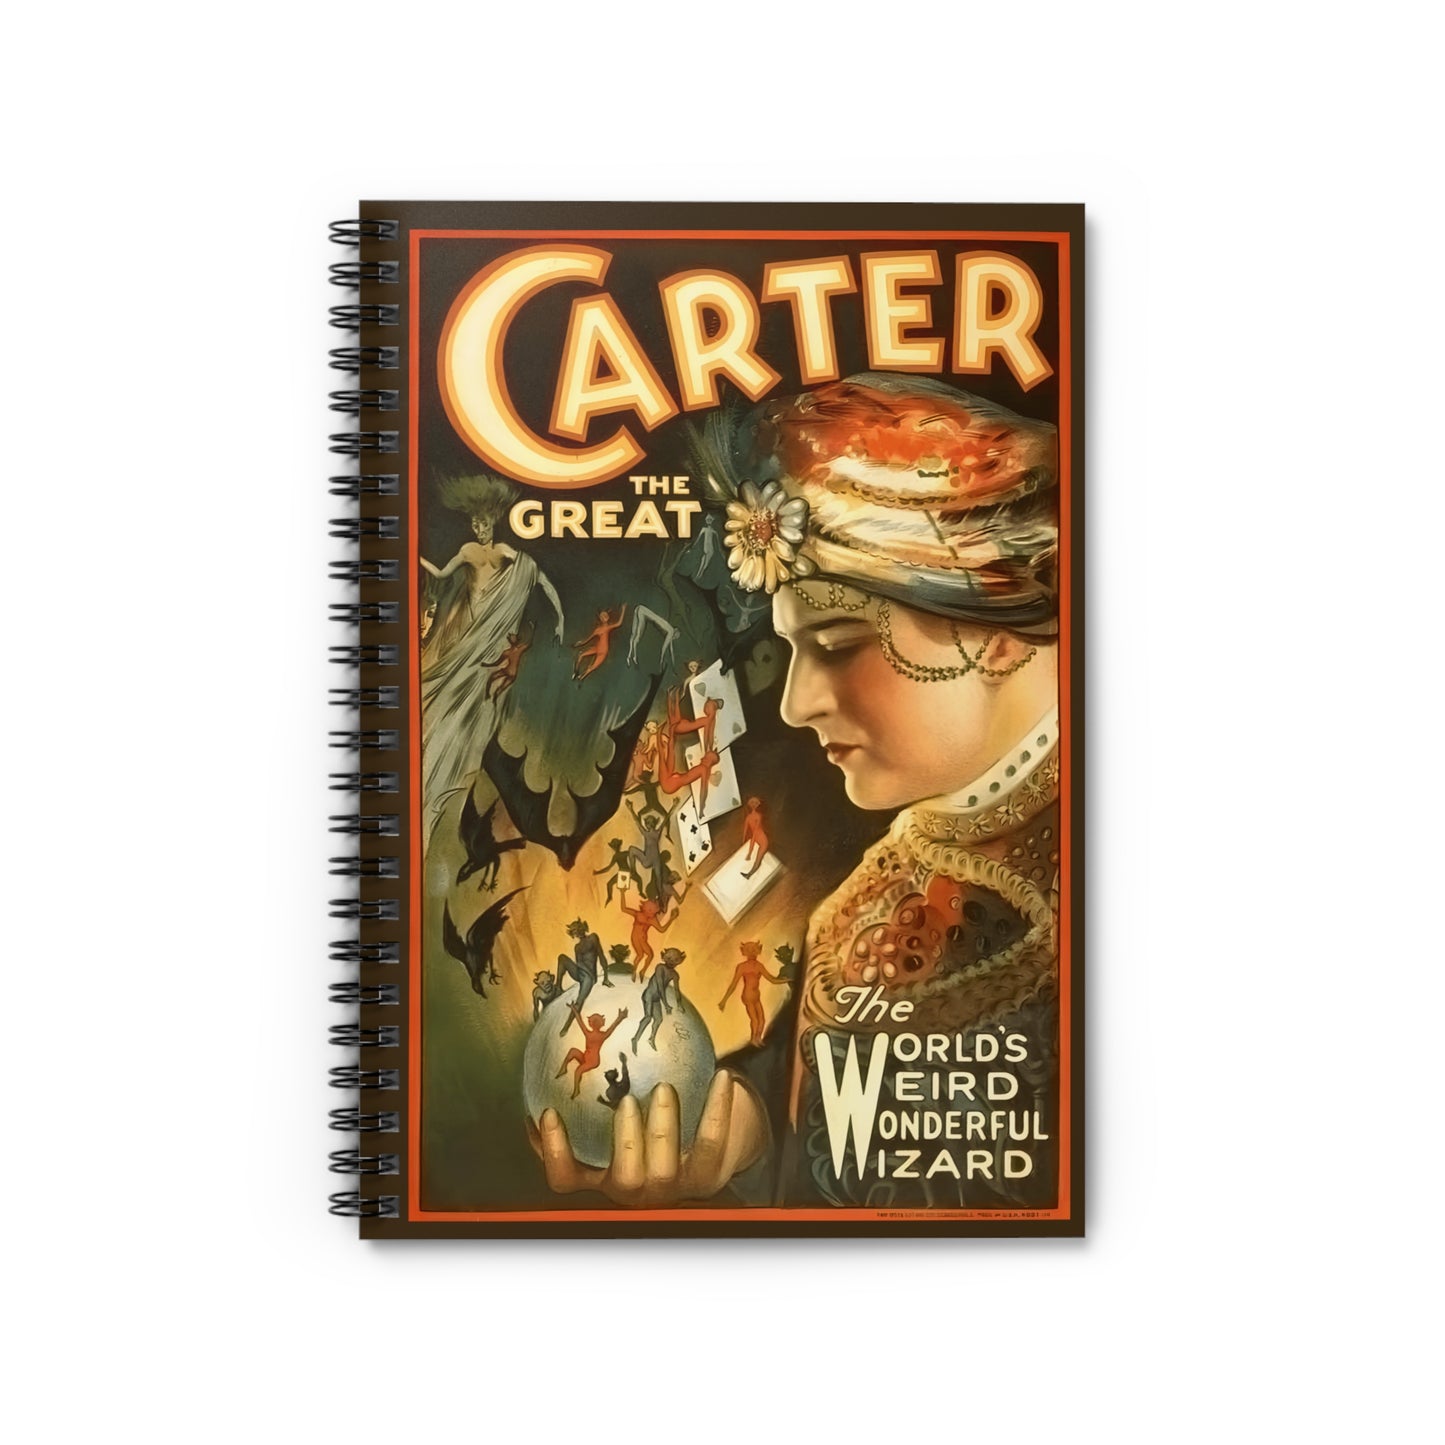 Spiral notebook for sale with a vintage poster of the Vaudeville era entertainer Carter the Great, the World's Weird Wonderful Wizard.